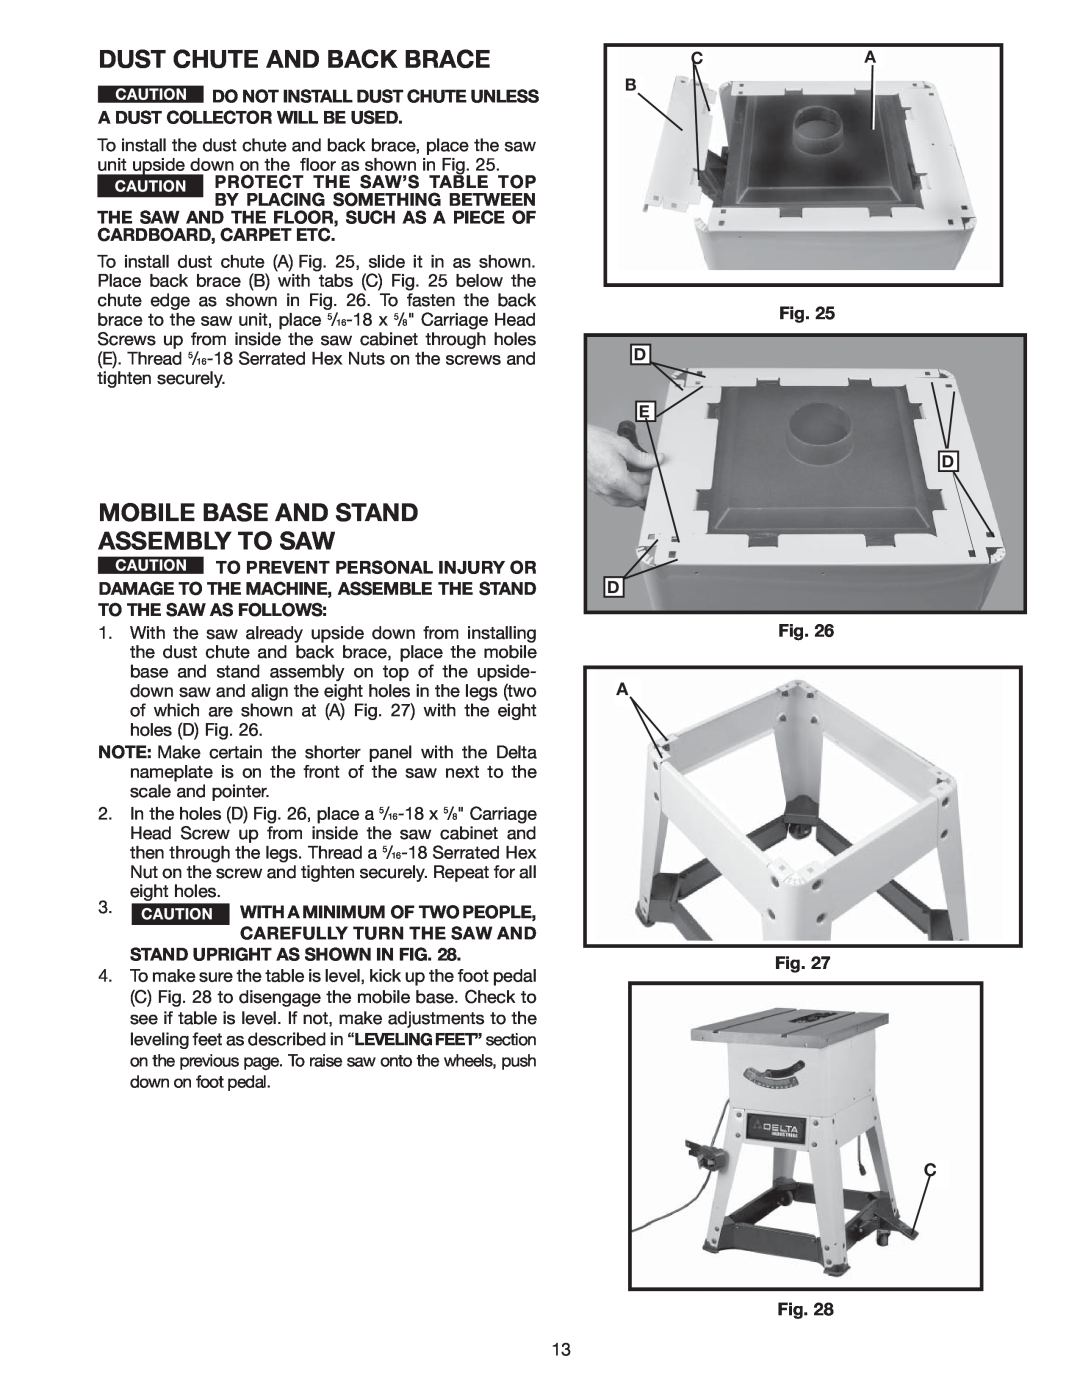 Delta 36-978 instruction manual Dust Chute And Back Brace, Mobile Base And Stand Assembly To Saw 